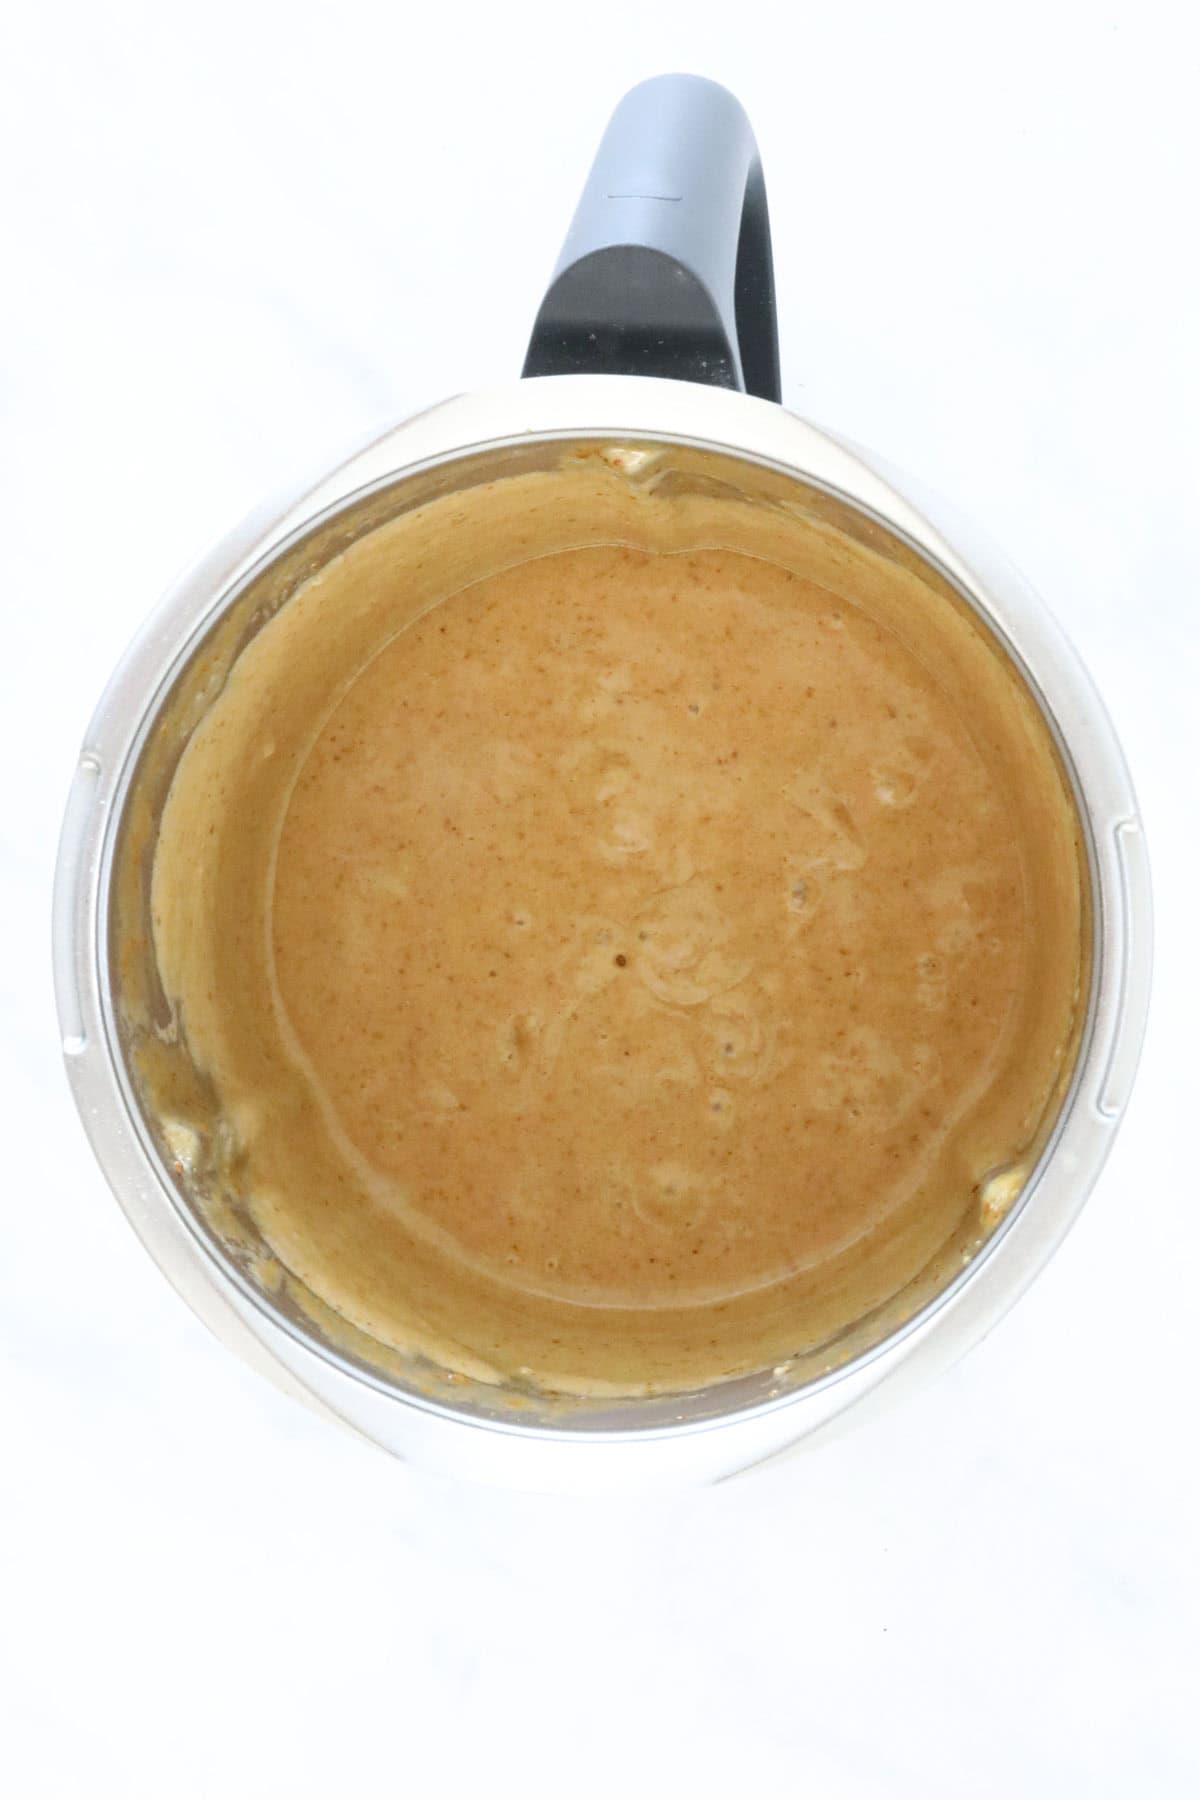 The date sponge pudding mix blended.